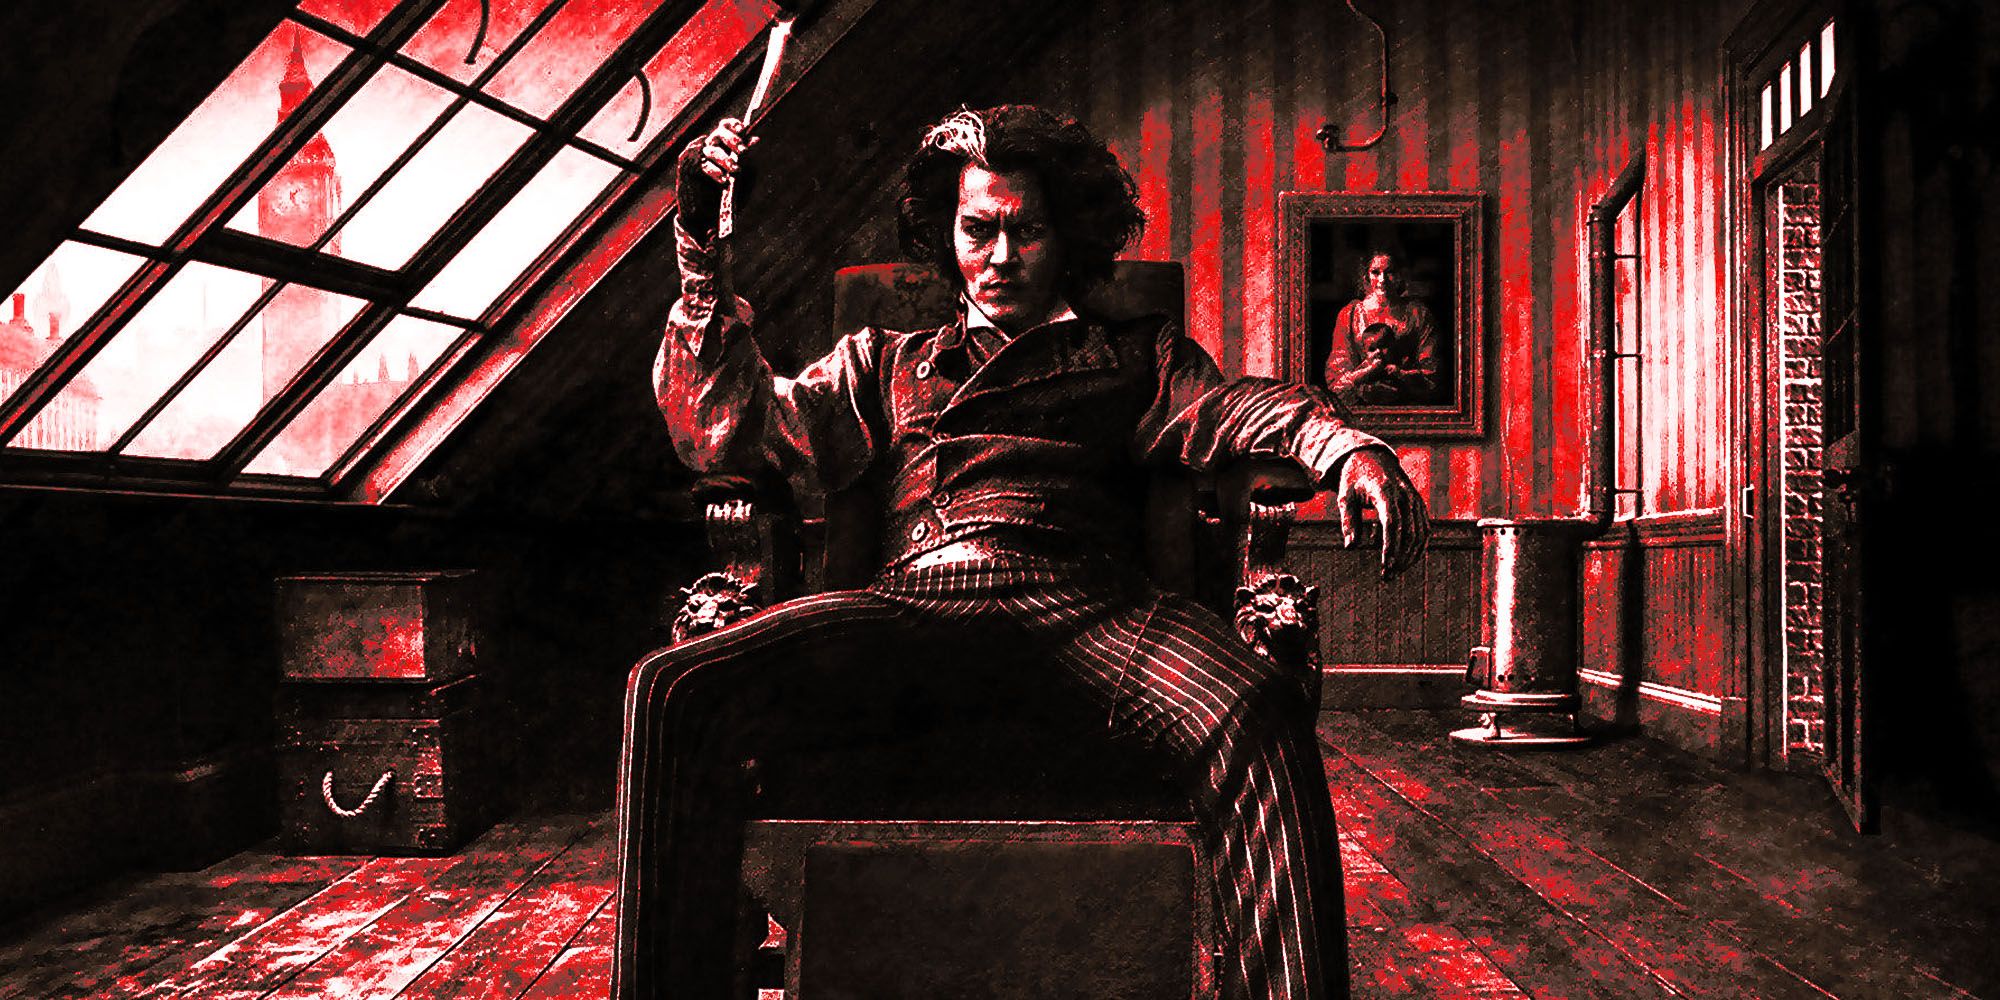 Sweeney Todd sitting in his infamous chair